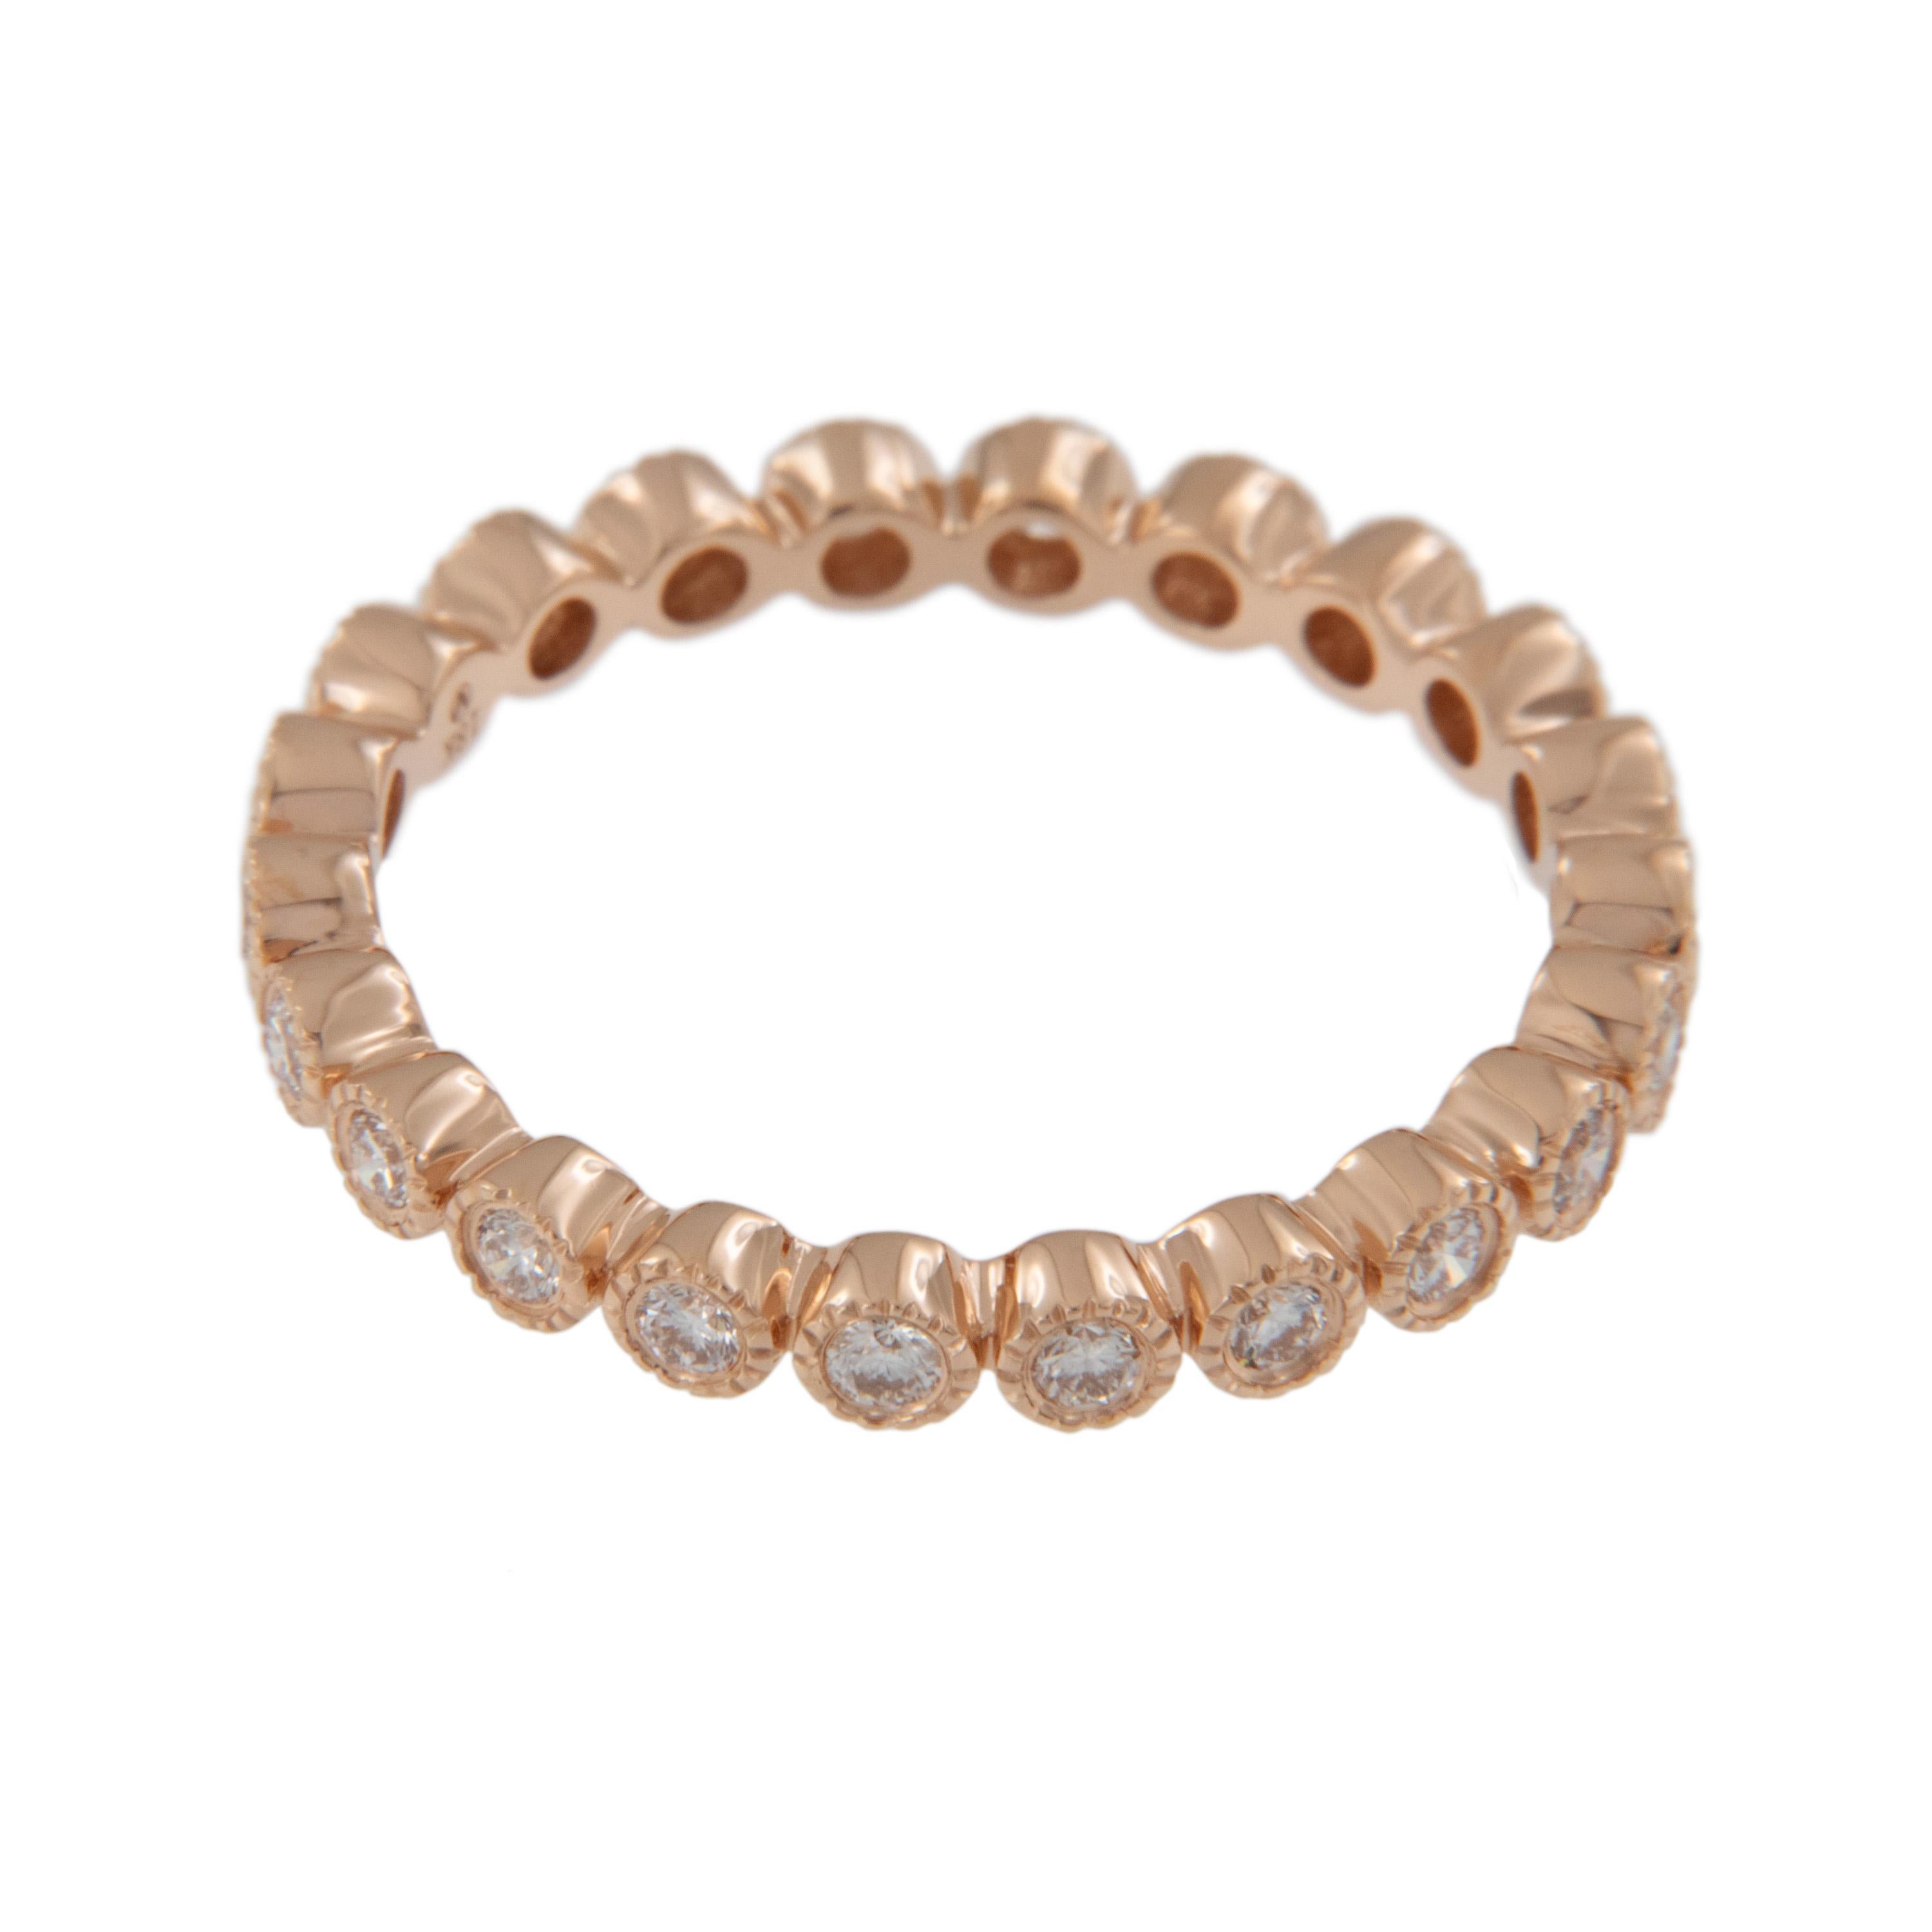 Created from warm 18 karat rose gold, this beautiful eternity band boasts 23 fine round brilliant cut diamonds = 0.42 Cttw each individually set in milgrain edged bezels for a stunning look on its own or check out our white and rose gold matching